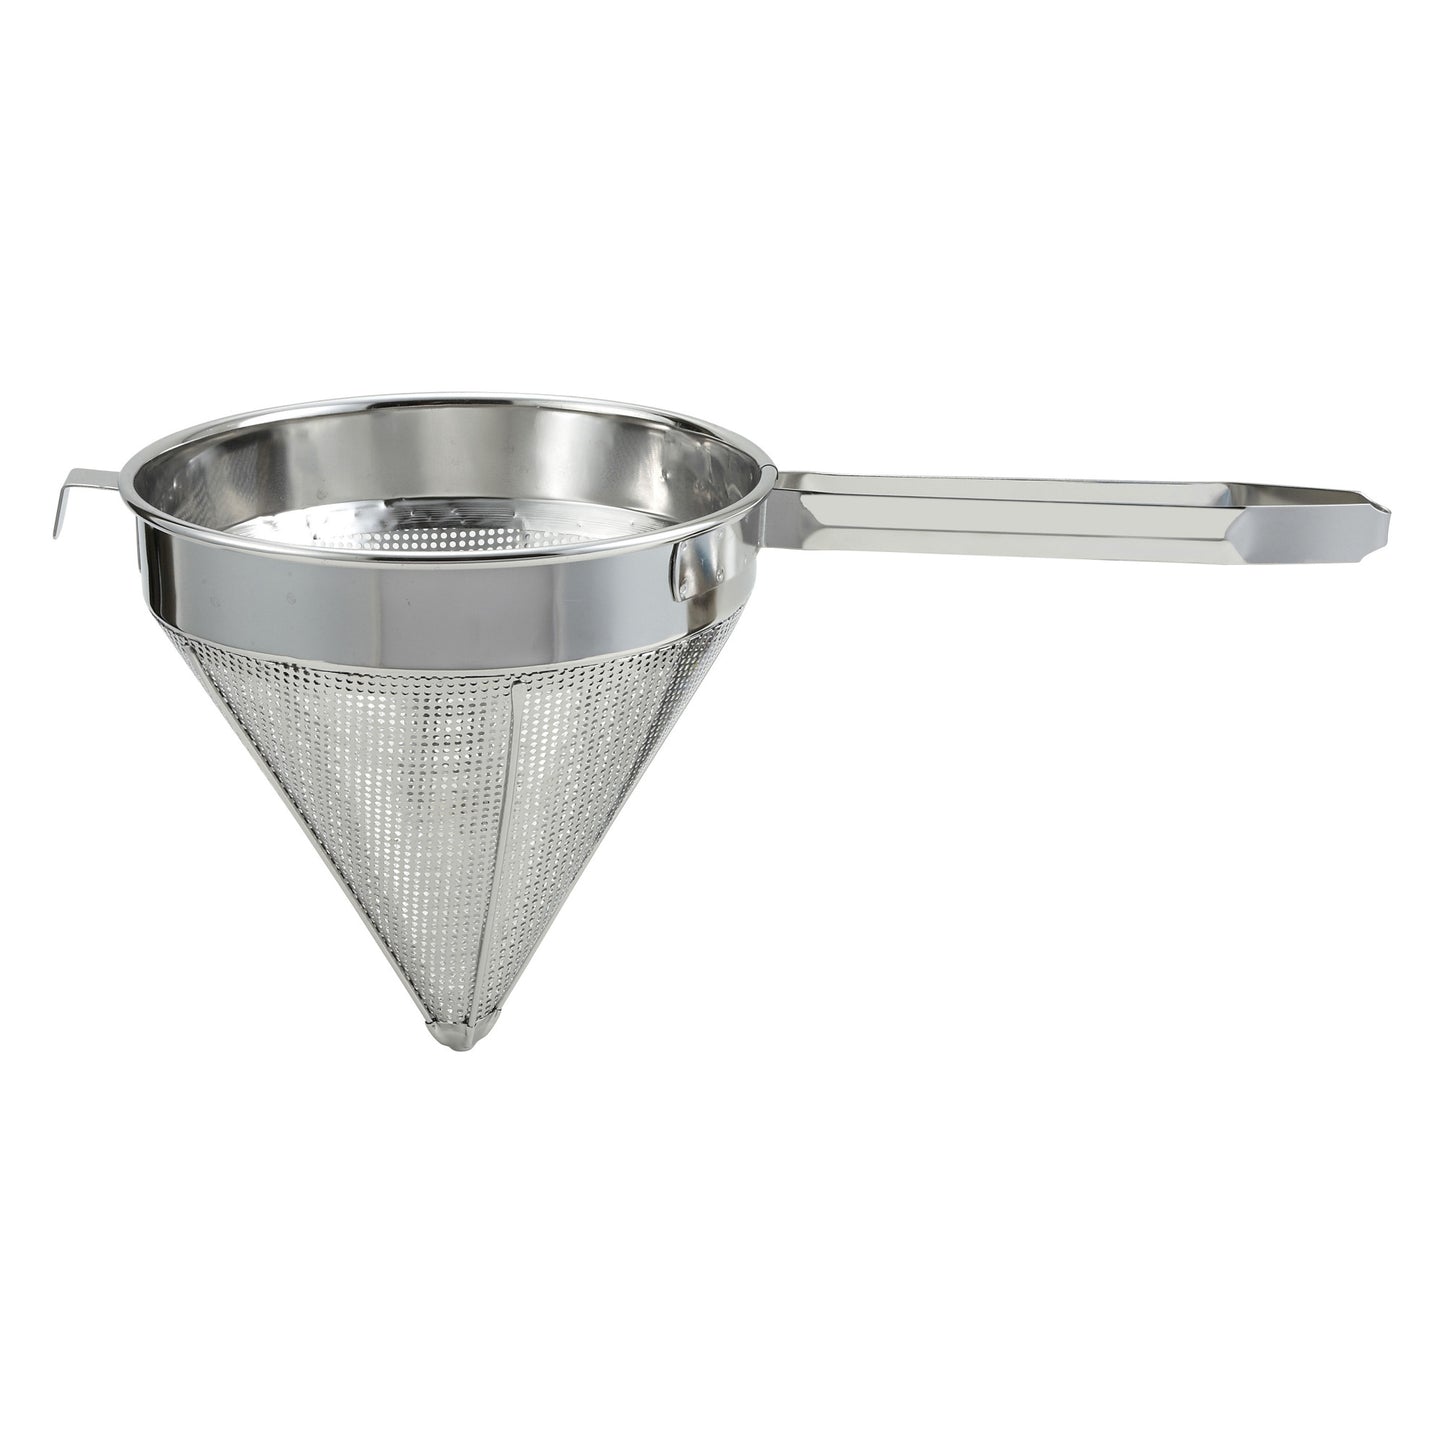 CCS-8C - Stainless Steel China Cap Strainer - 8", Coarse